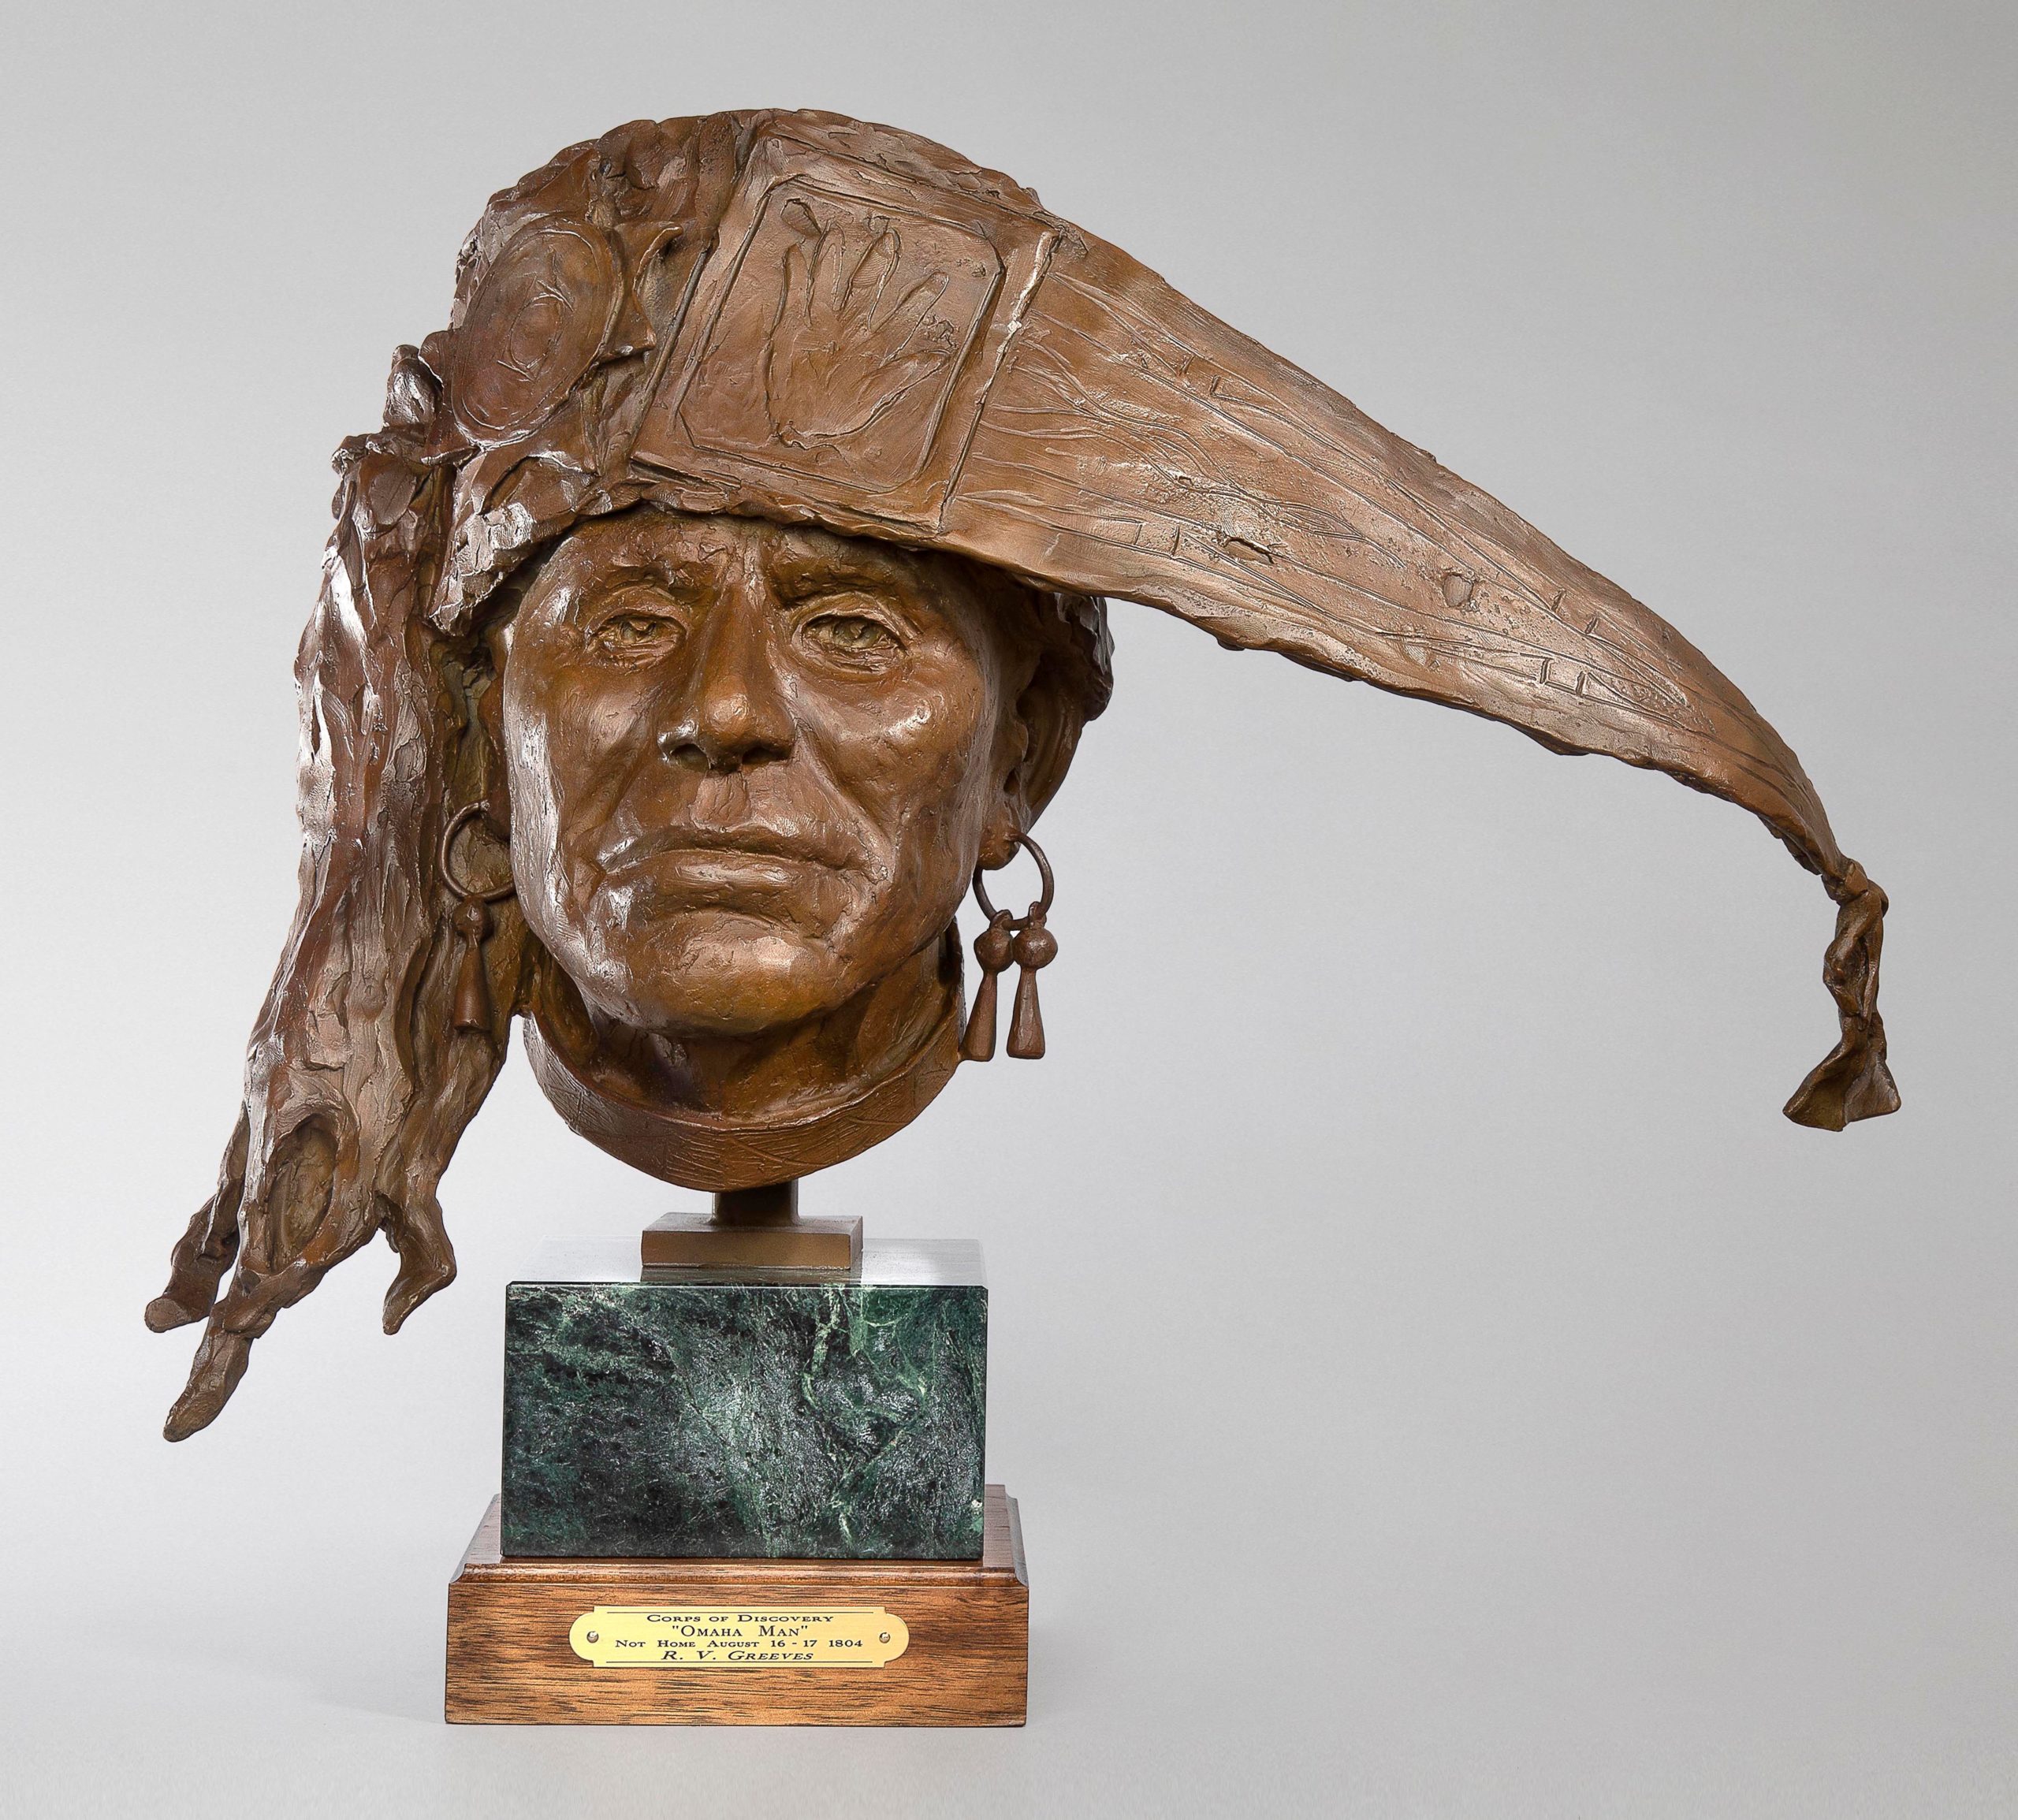 

											Richard V. Greeves </b>

											<em>
												 Lewis & Clark, Corp of Discovery, 1804-1806: The Native Peoples Lewis & Clark Encountered on their Epic Journey</em> 

											<h4>
												August 6 - October 30, 2021											</h4>

		                																																													<i>Omaha Man,</i>  
																																																					bronze, 
																																								17 x 18 x 8 inches 
																								
		                				